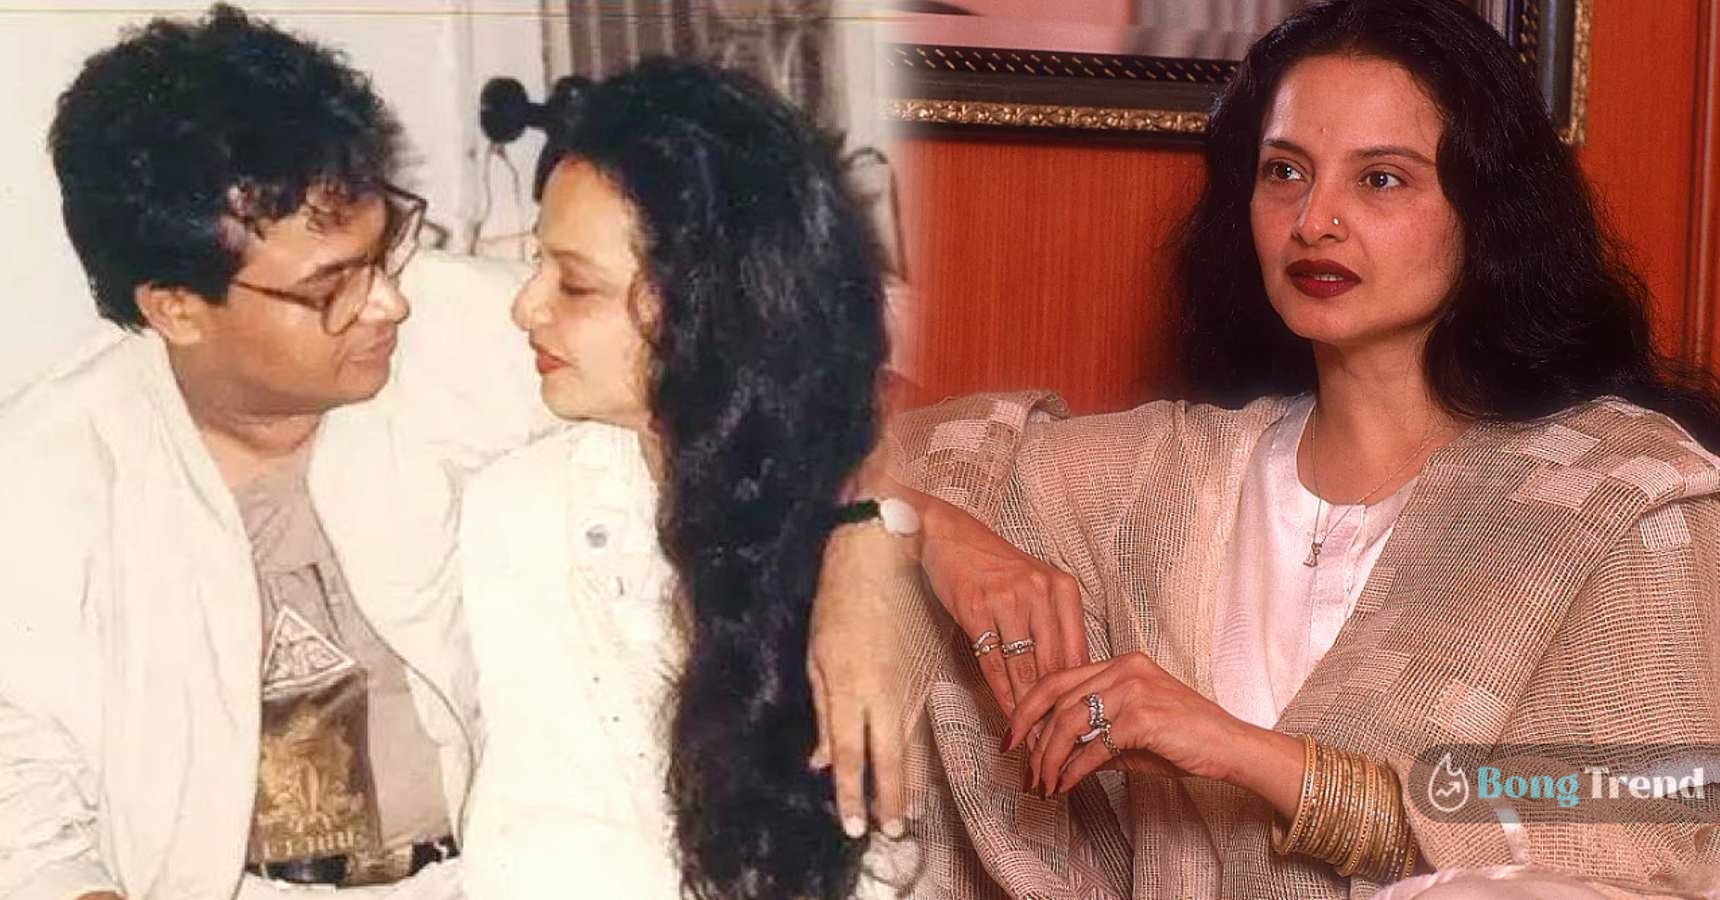 what Rekha's Husaband Mukesh Agarwal wrote in his Suicide note